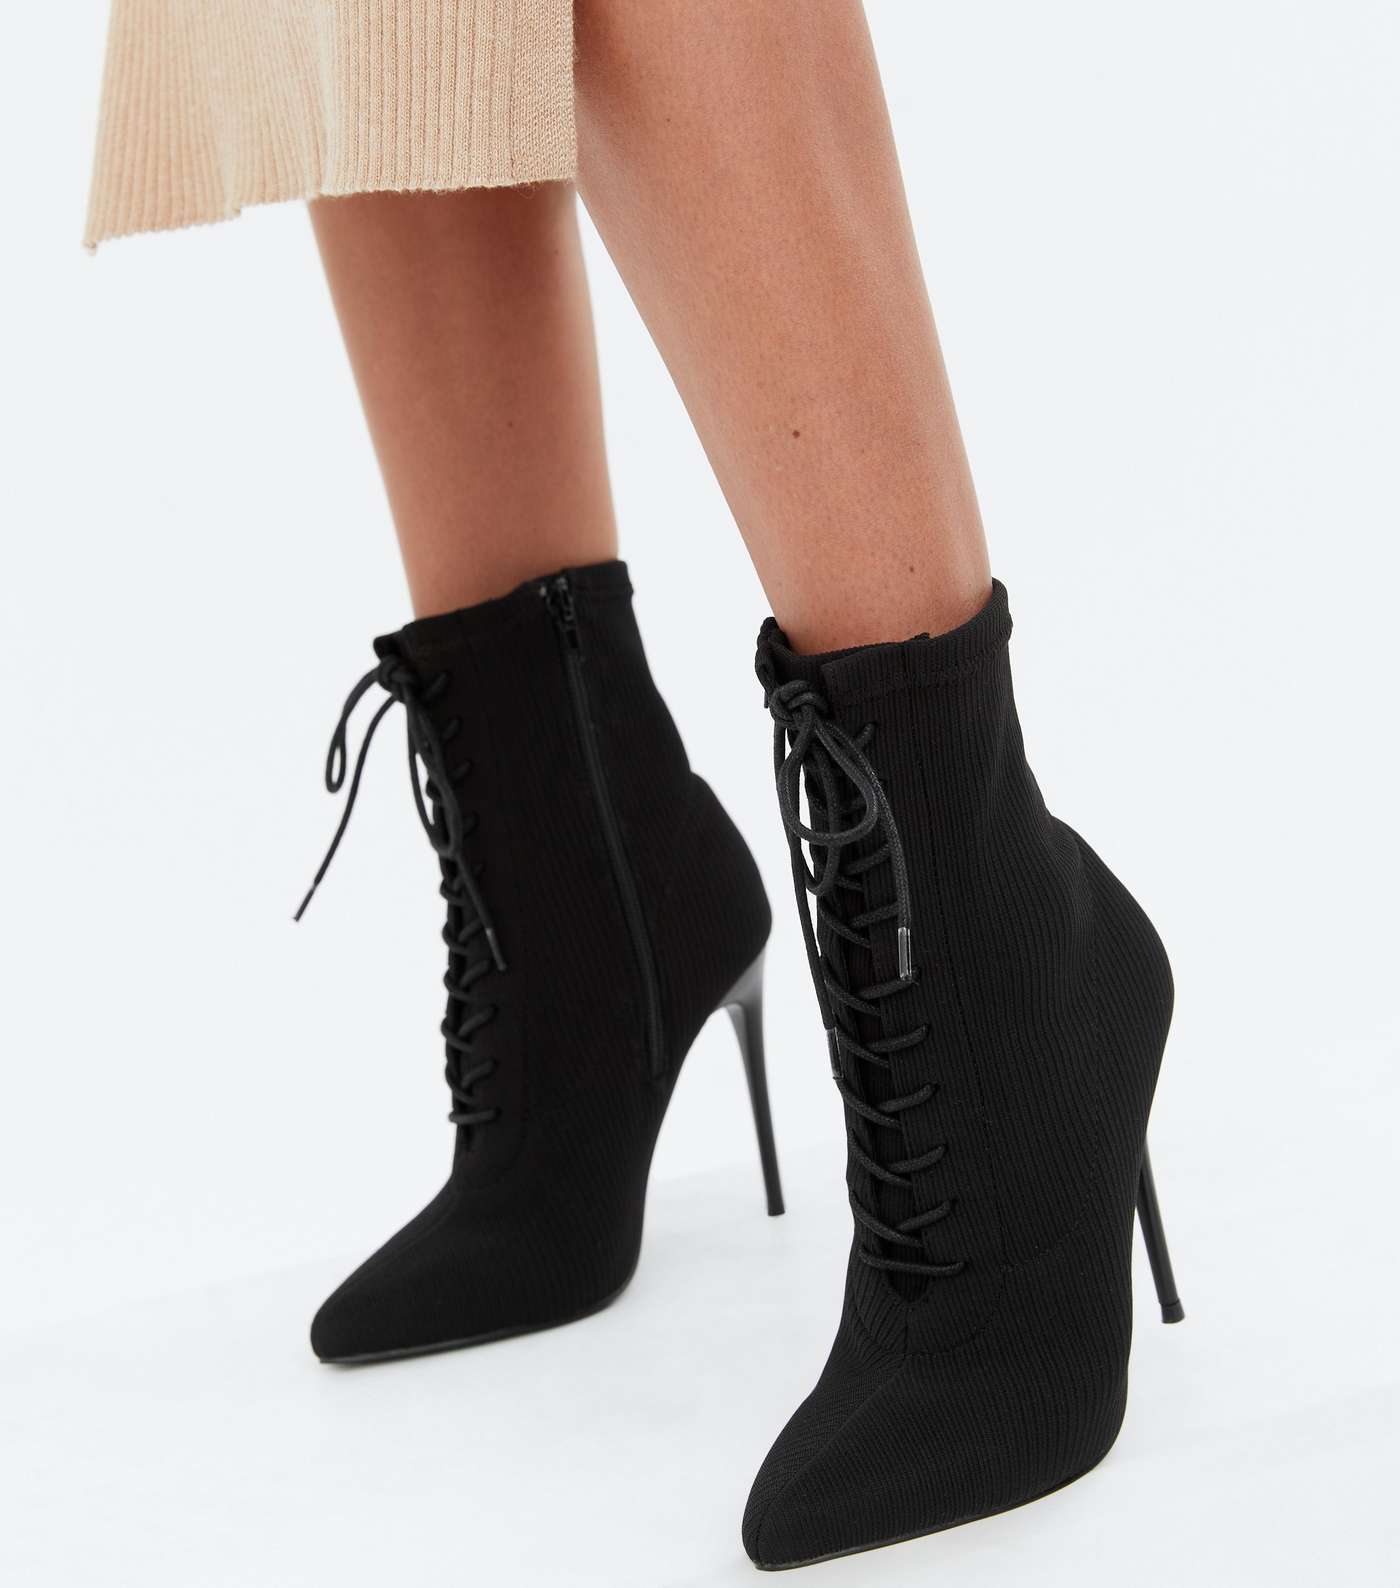 Black Knit Lace Up Stiletto Heel Ankle Boots Image 2